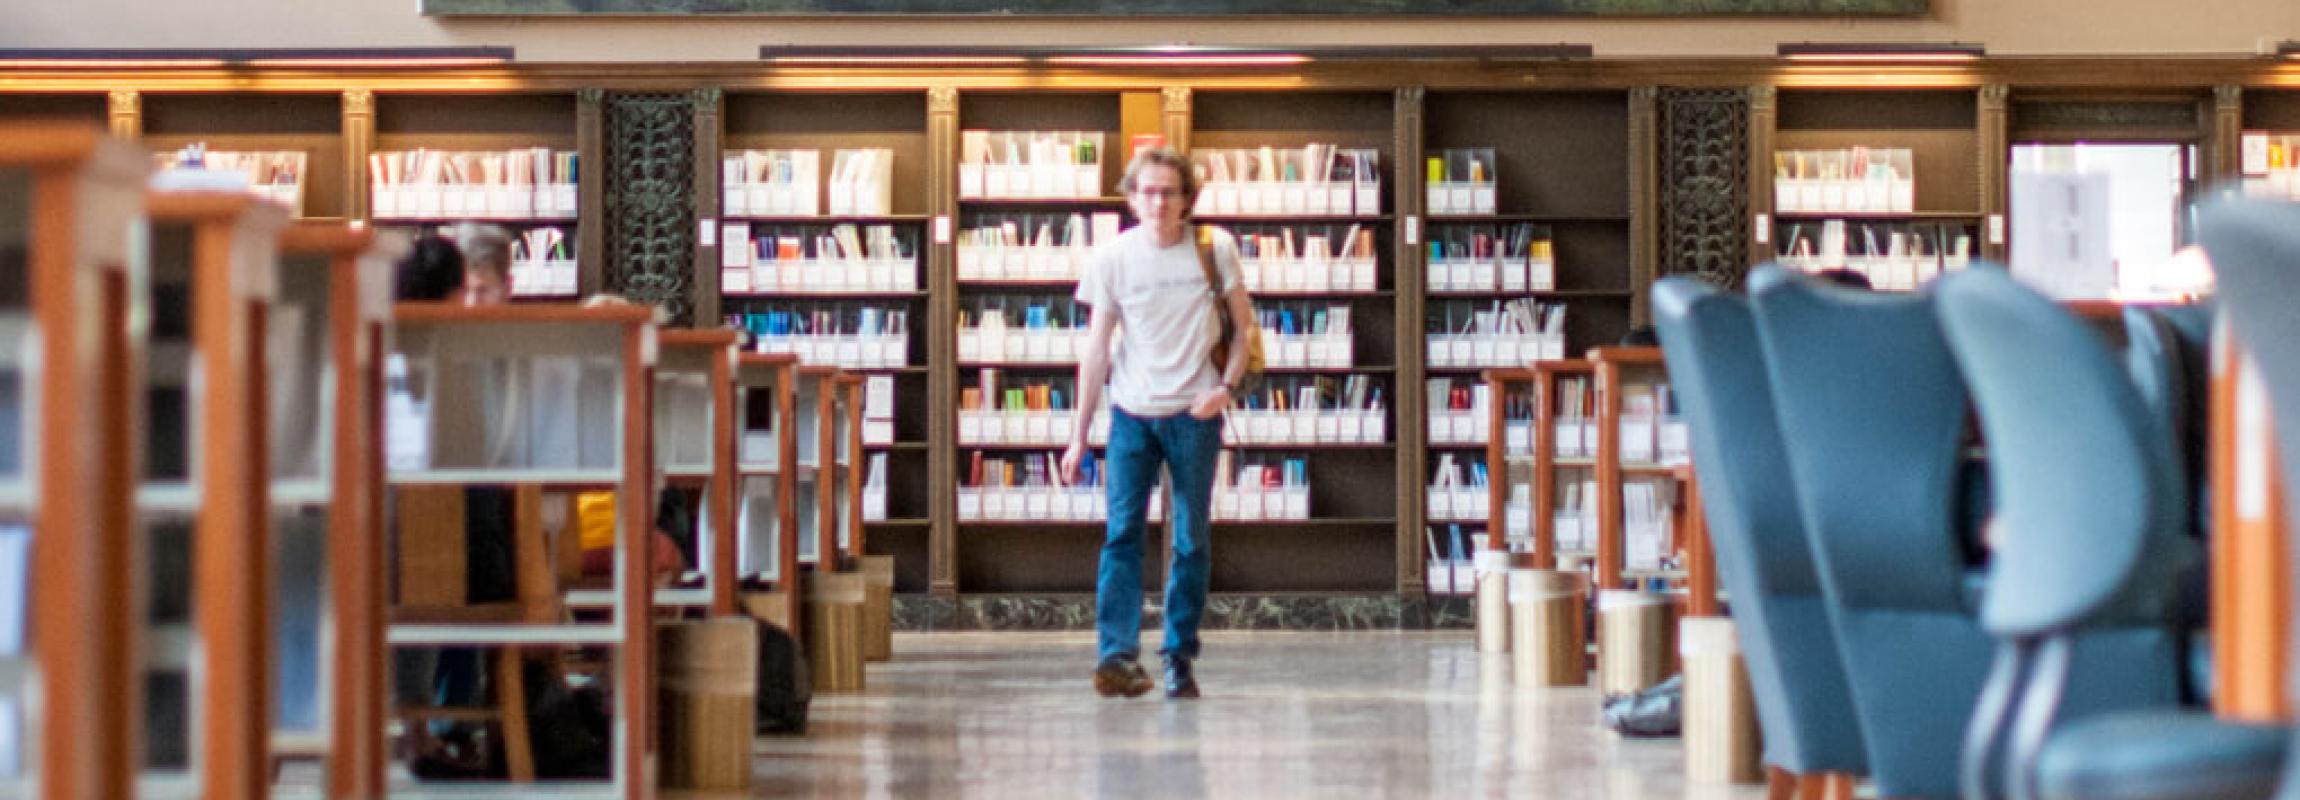 Photo of a student walking through a library